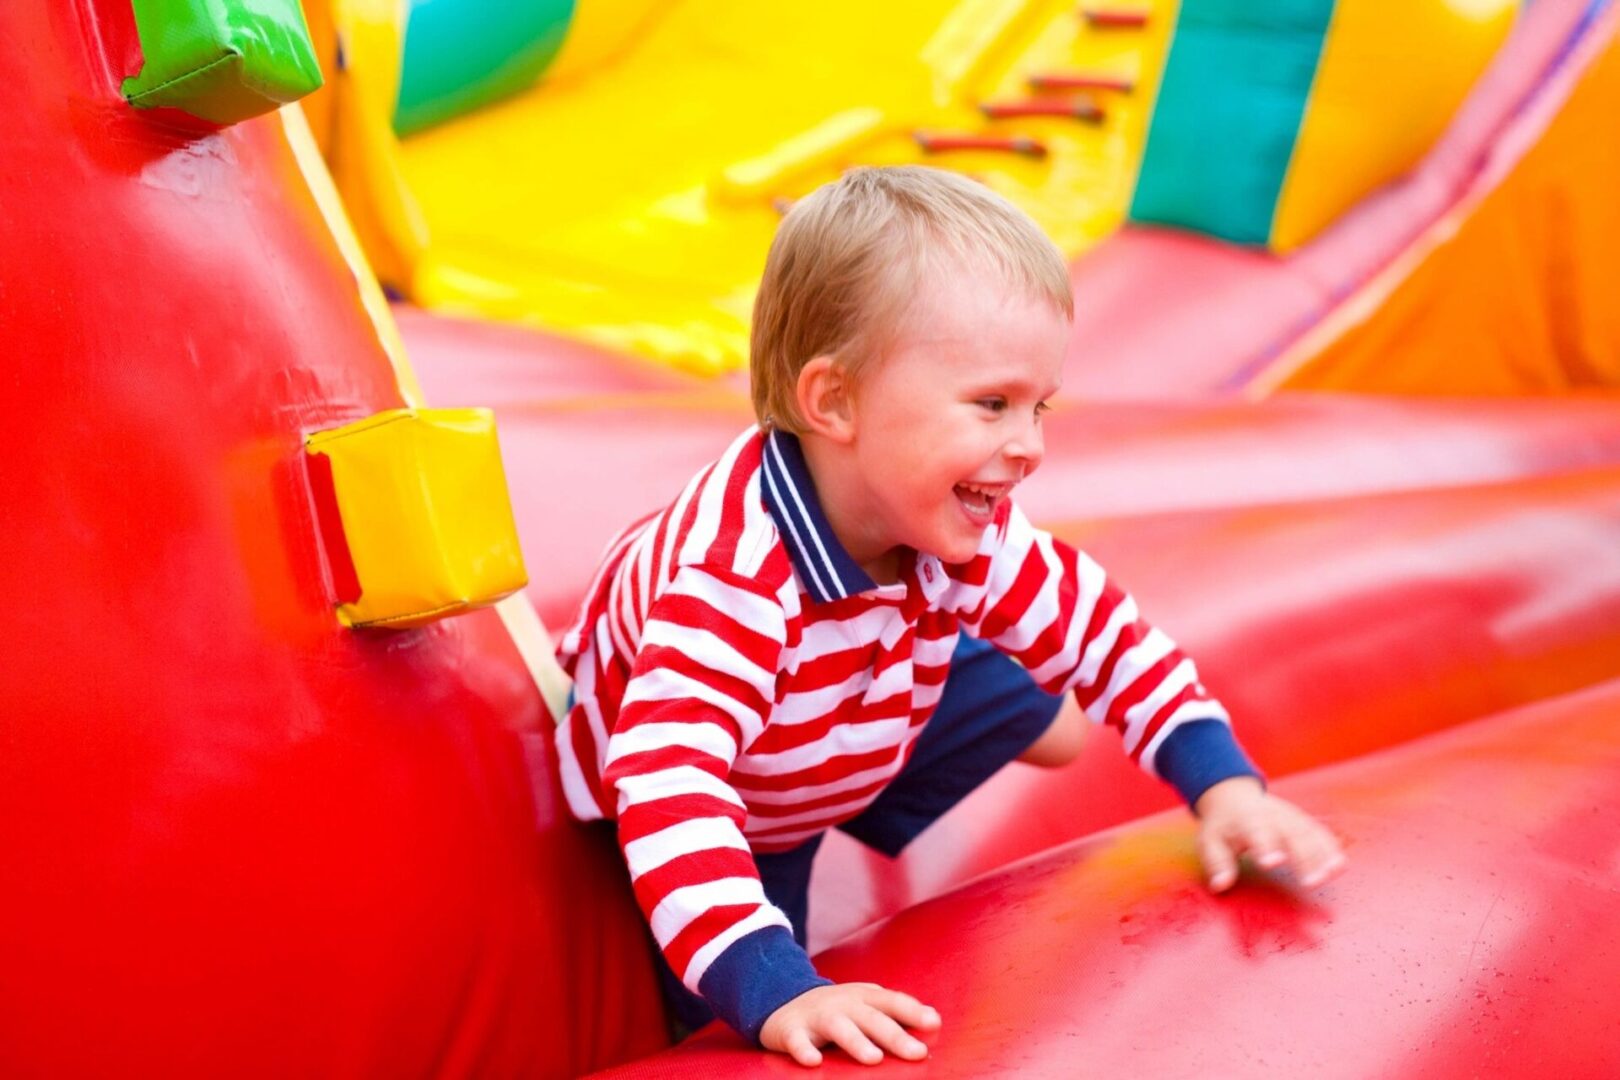 A toddler playing in the fun park and smiling